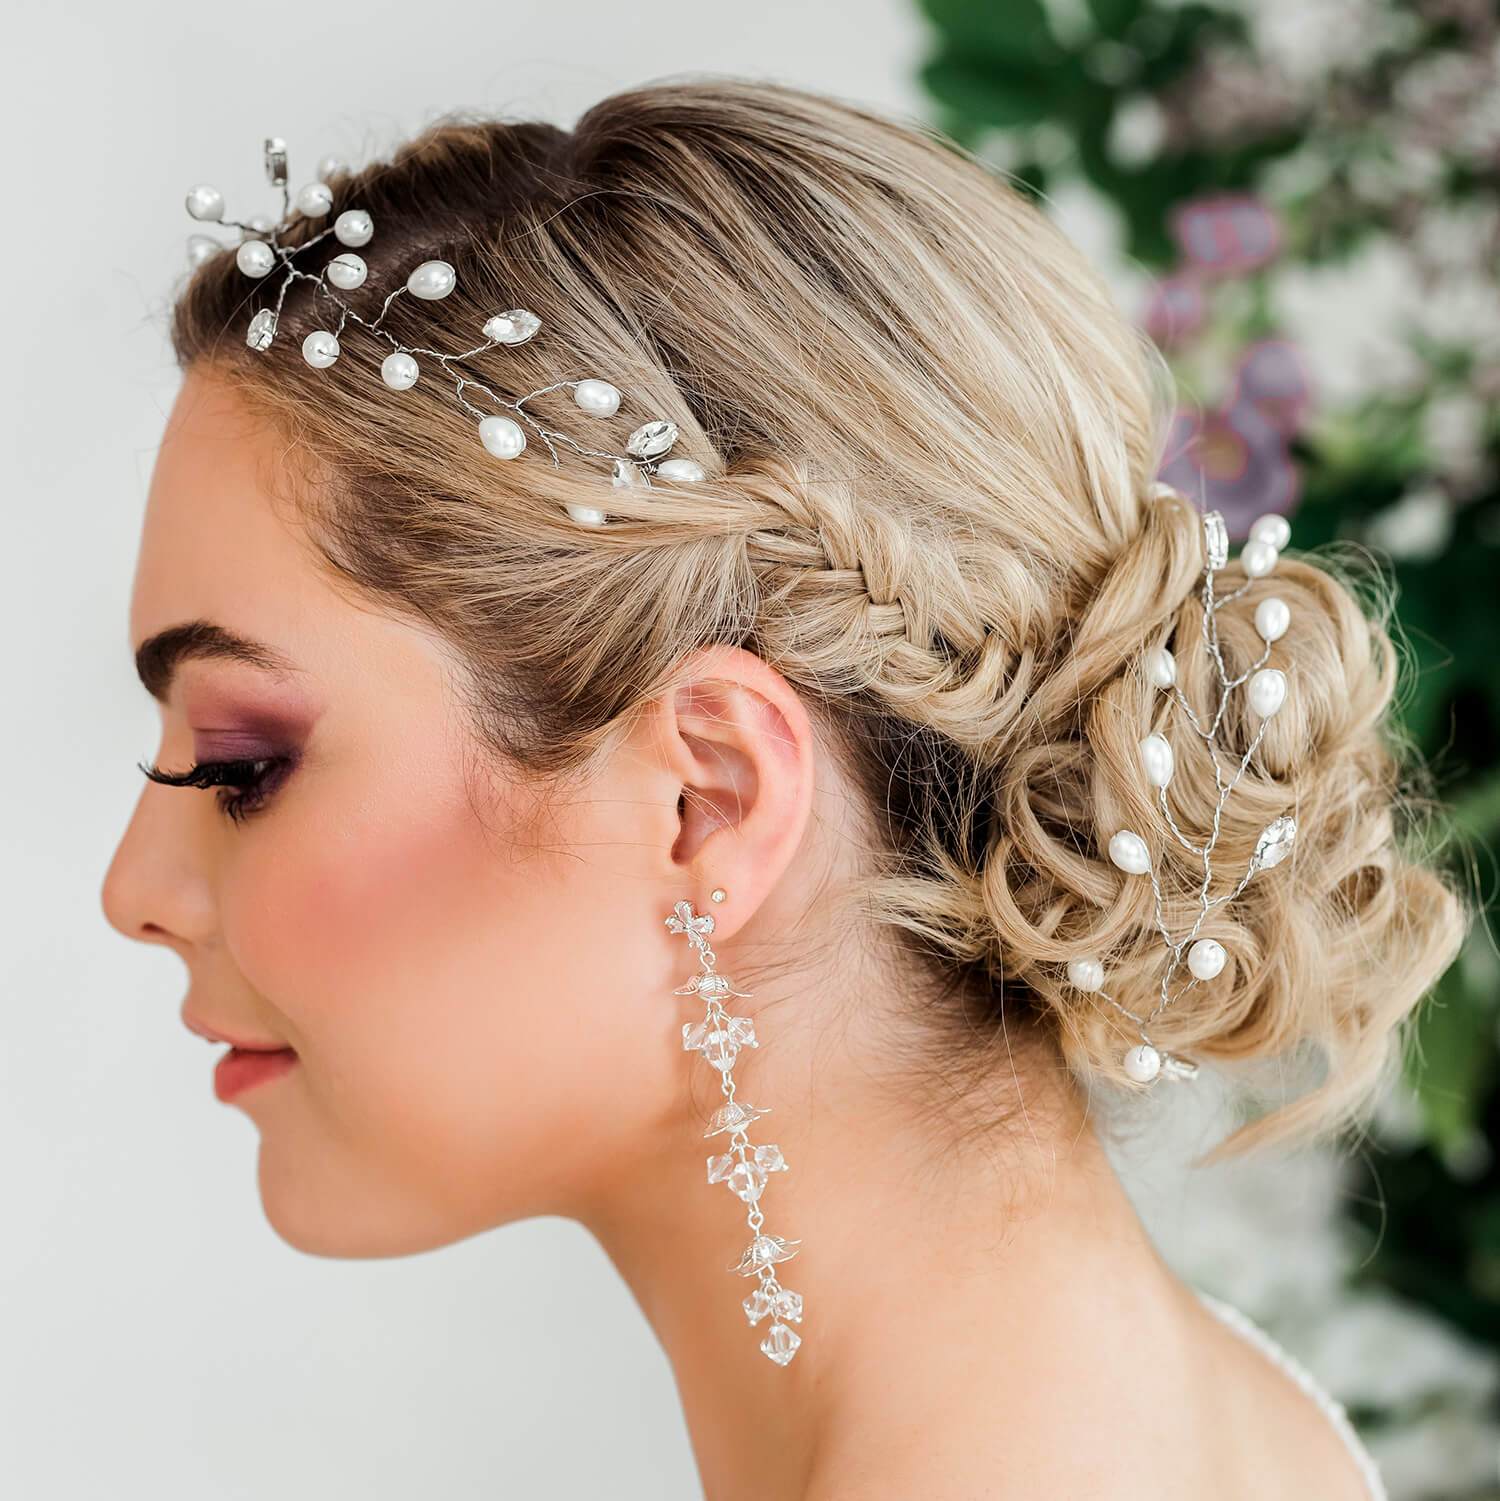 Silver Ivy Bridal Hair Vine Headpiece from side